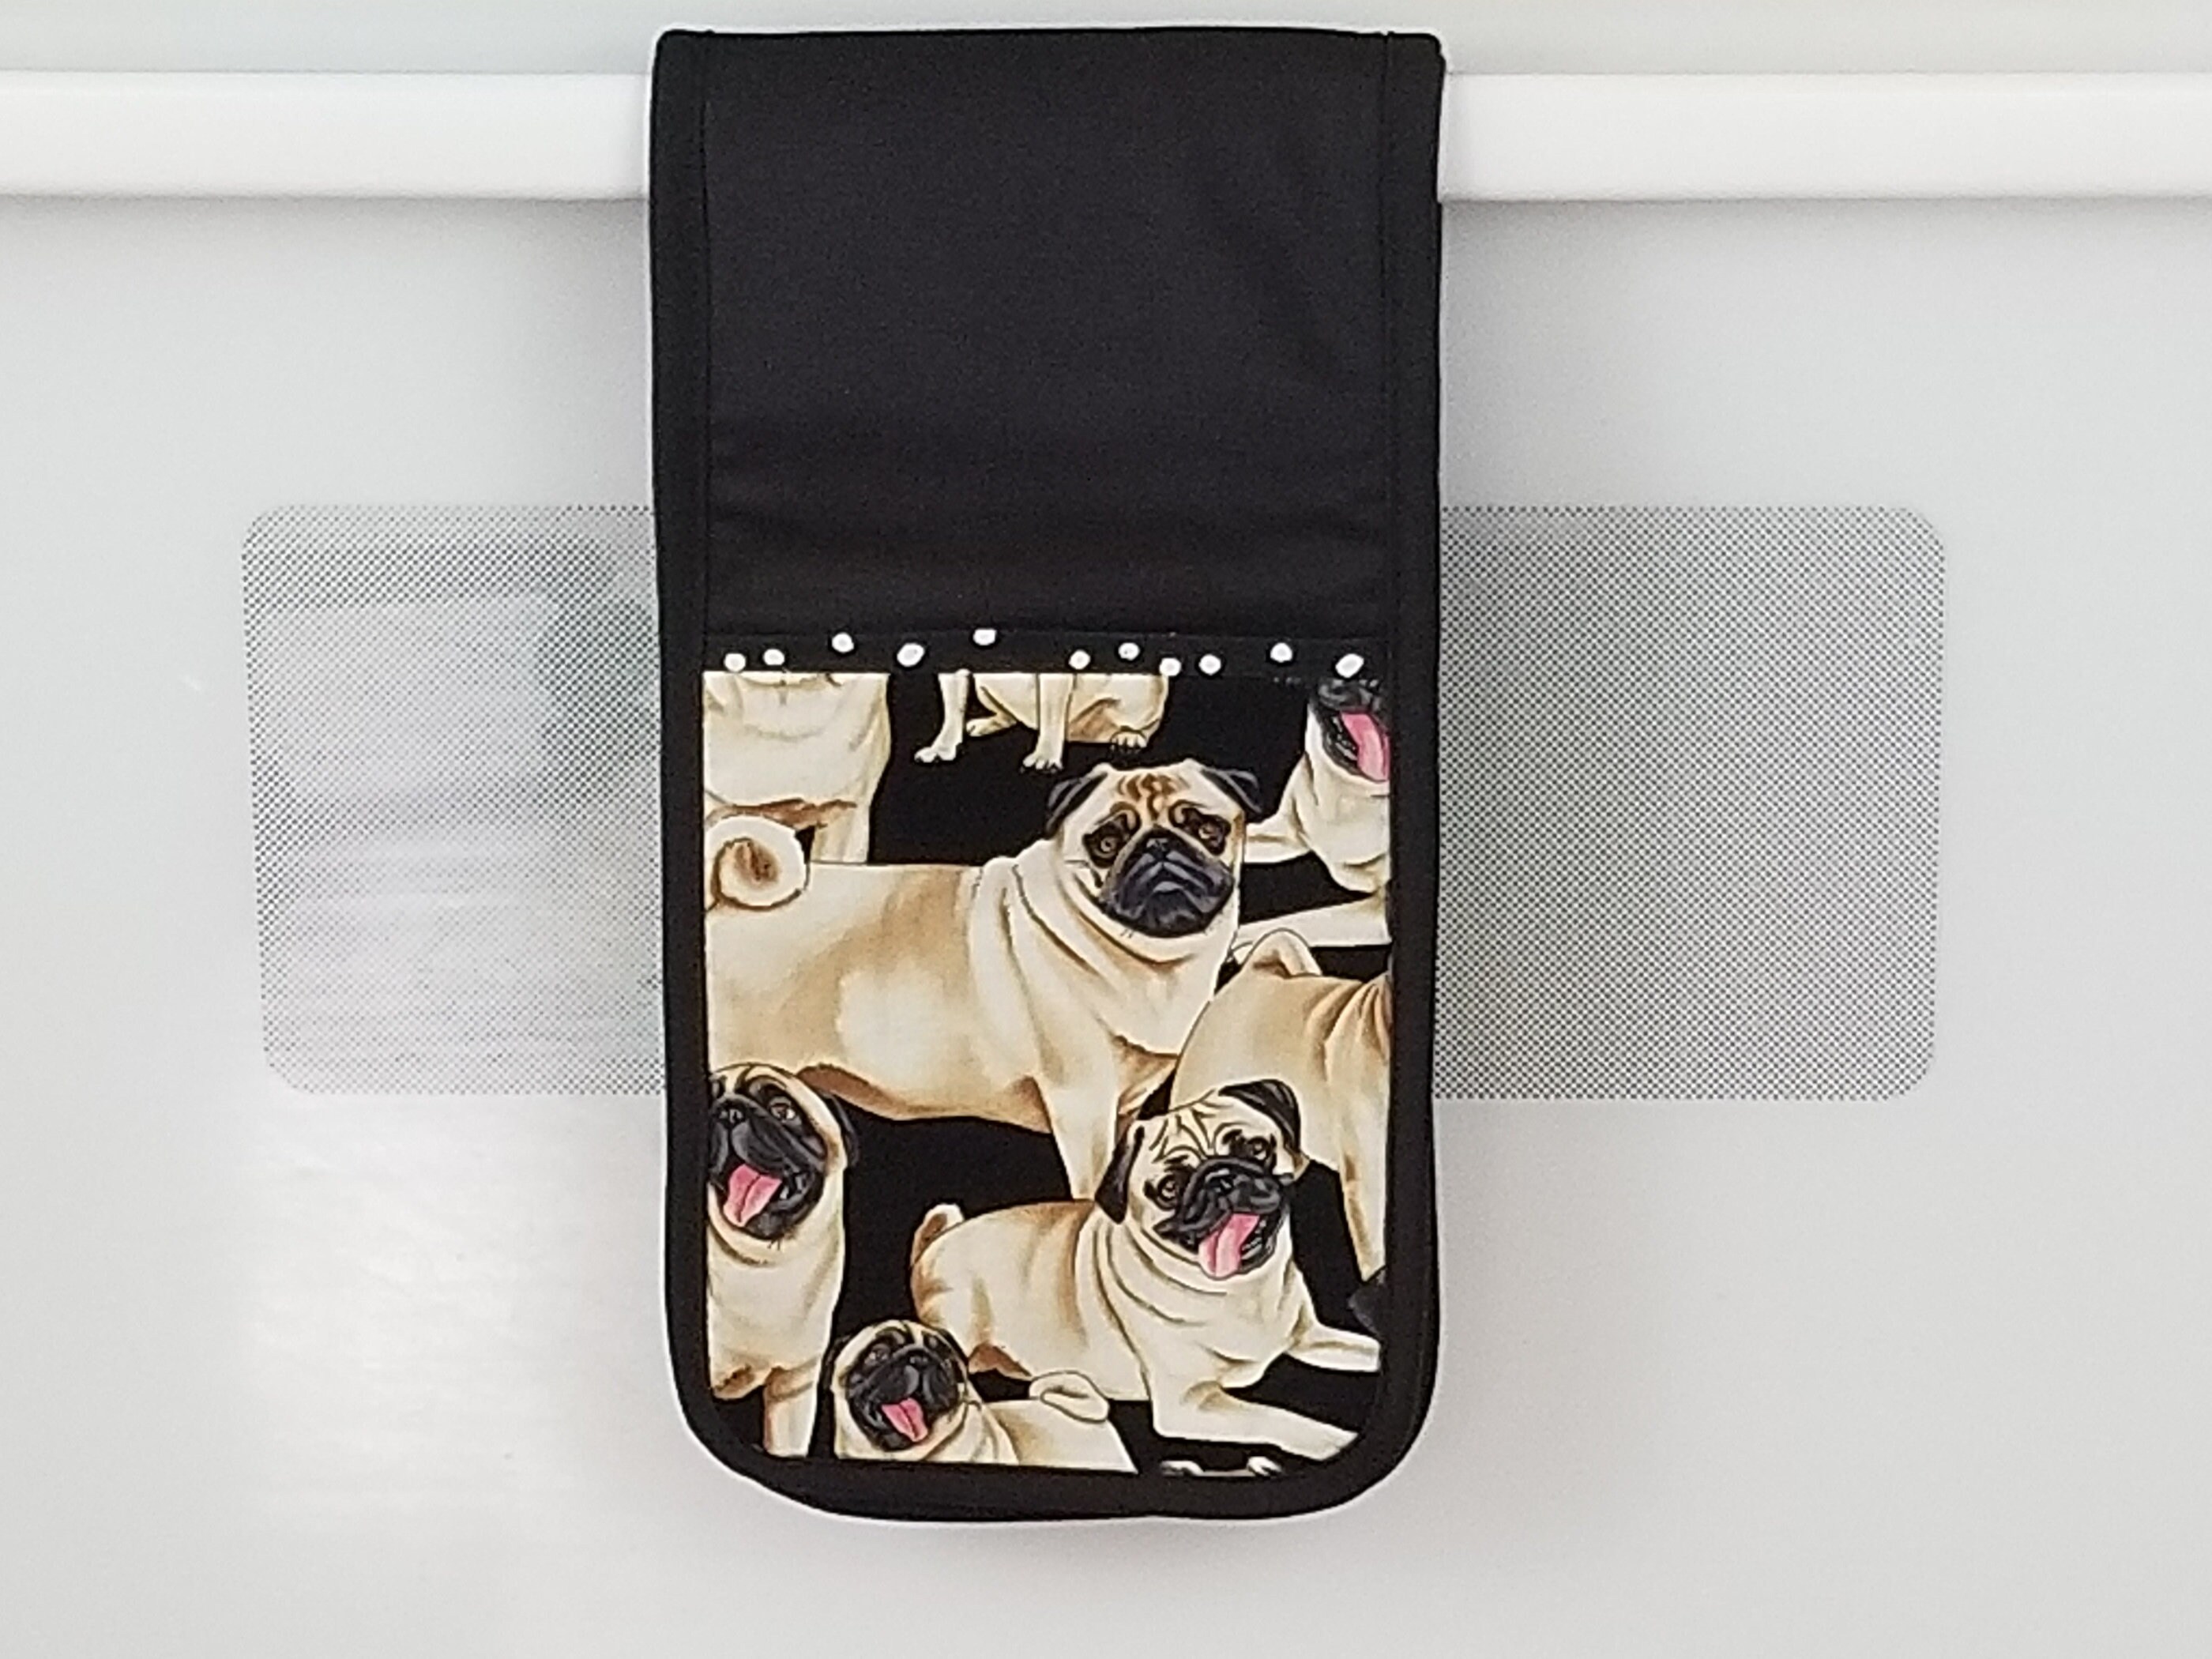 Pug Fingerless Gloves With Pockets for Dog Lovers 